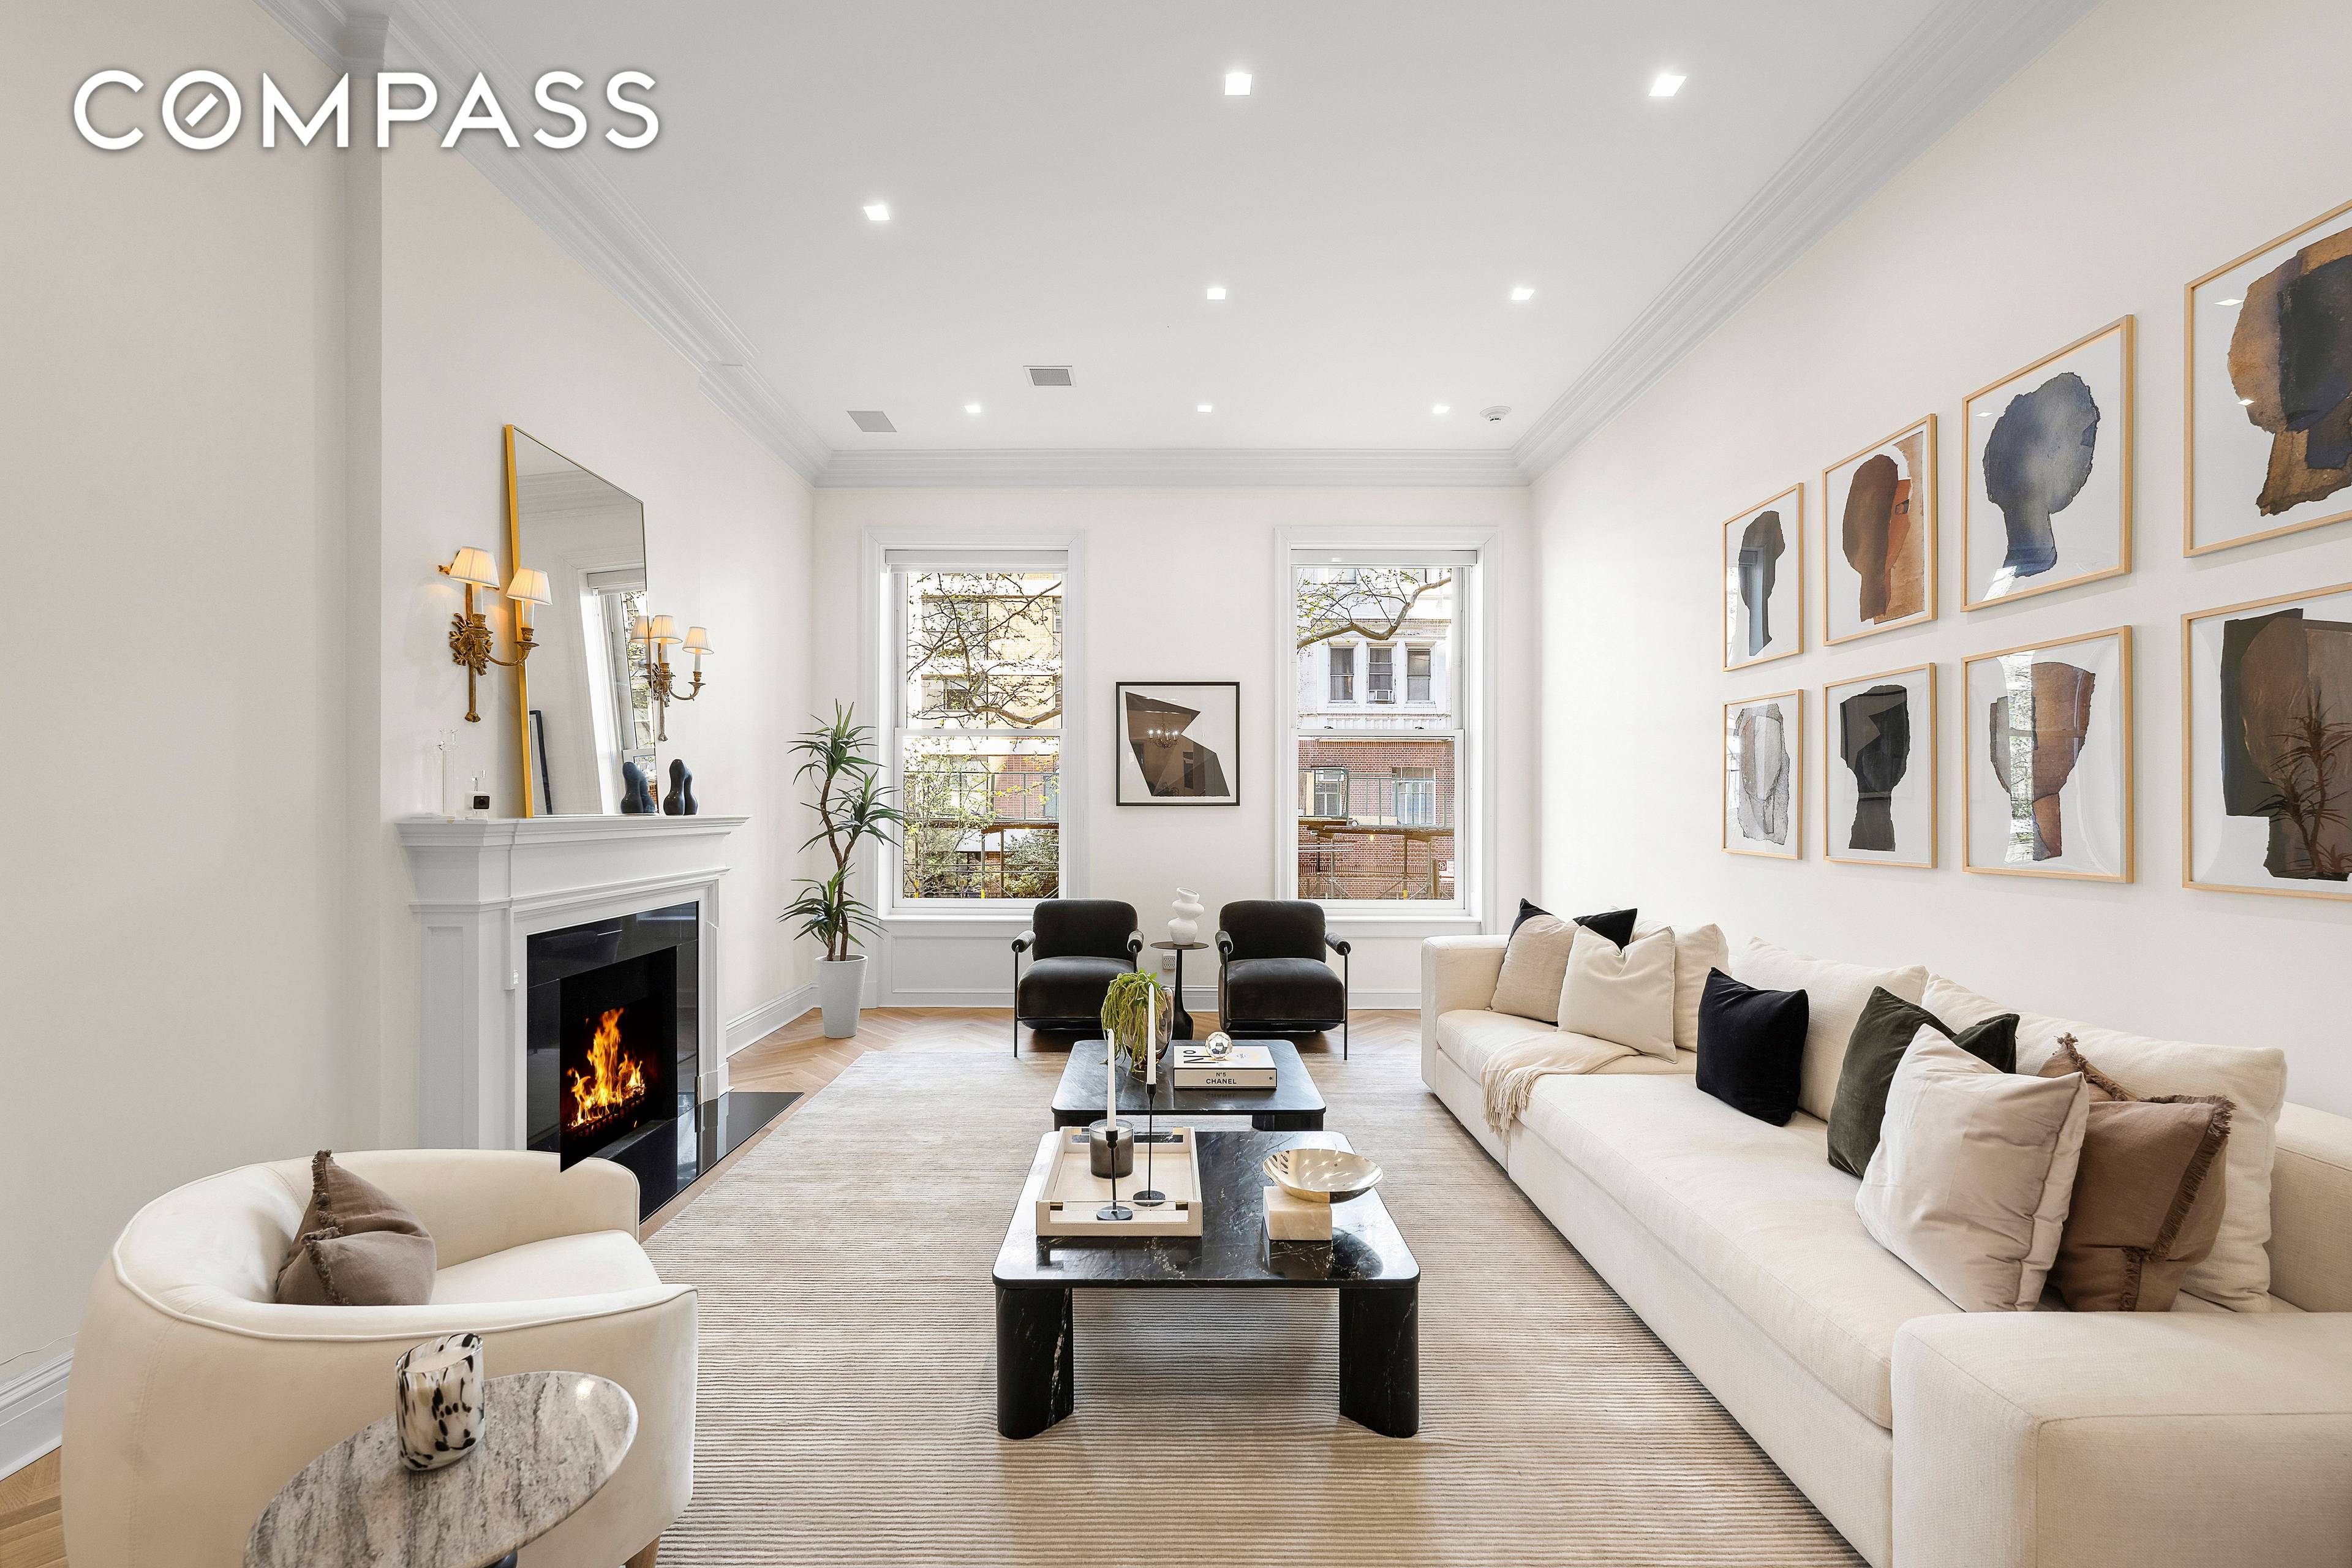 Situated just a block from Central Park, 50 East 73rd Street is an immaculate home awaiting its new owner.